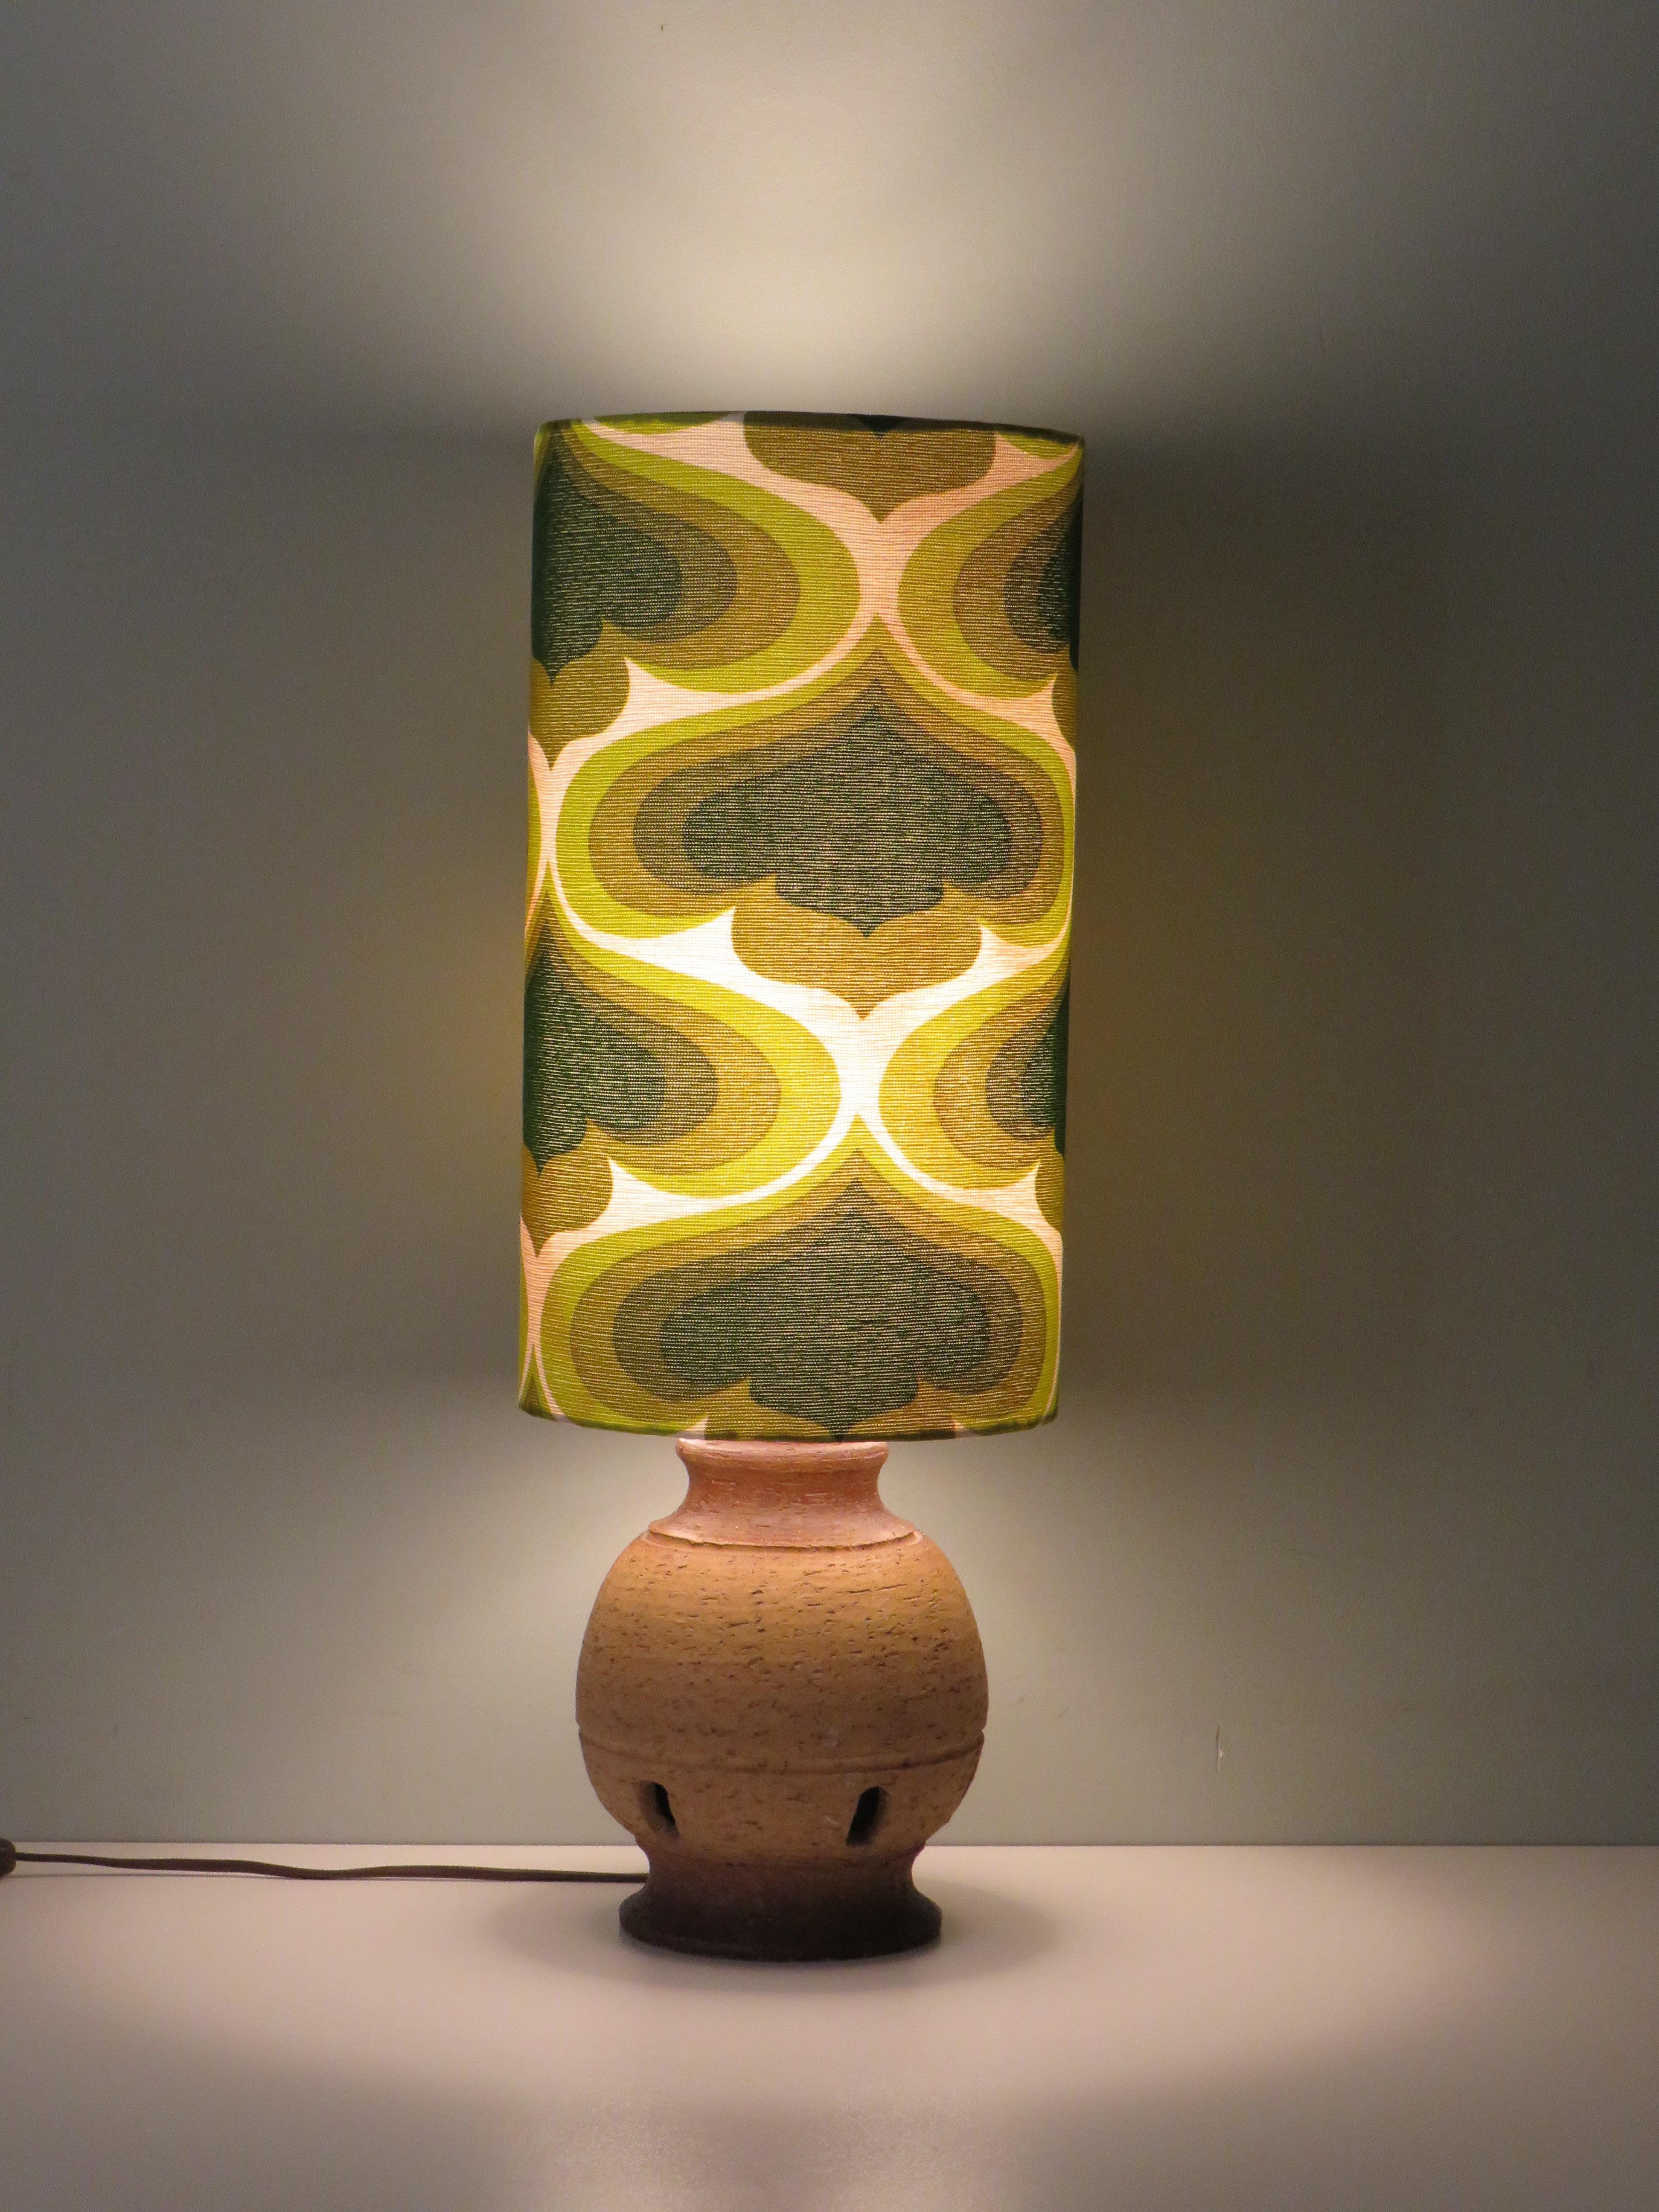 Lamp base from Massive Belgium made of unglazed natural earthenware with 5 rectangular recesses.
The lampshade is made to measure from a vintage fabric with a Space age motif with green tones on a cream-colored background.
The lampshade is 40 cm